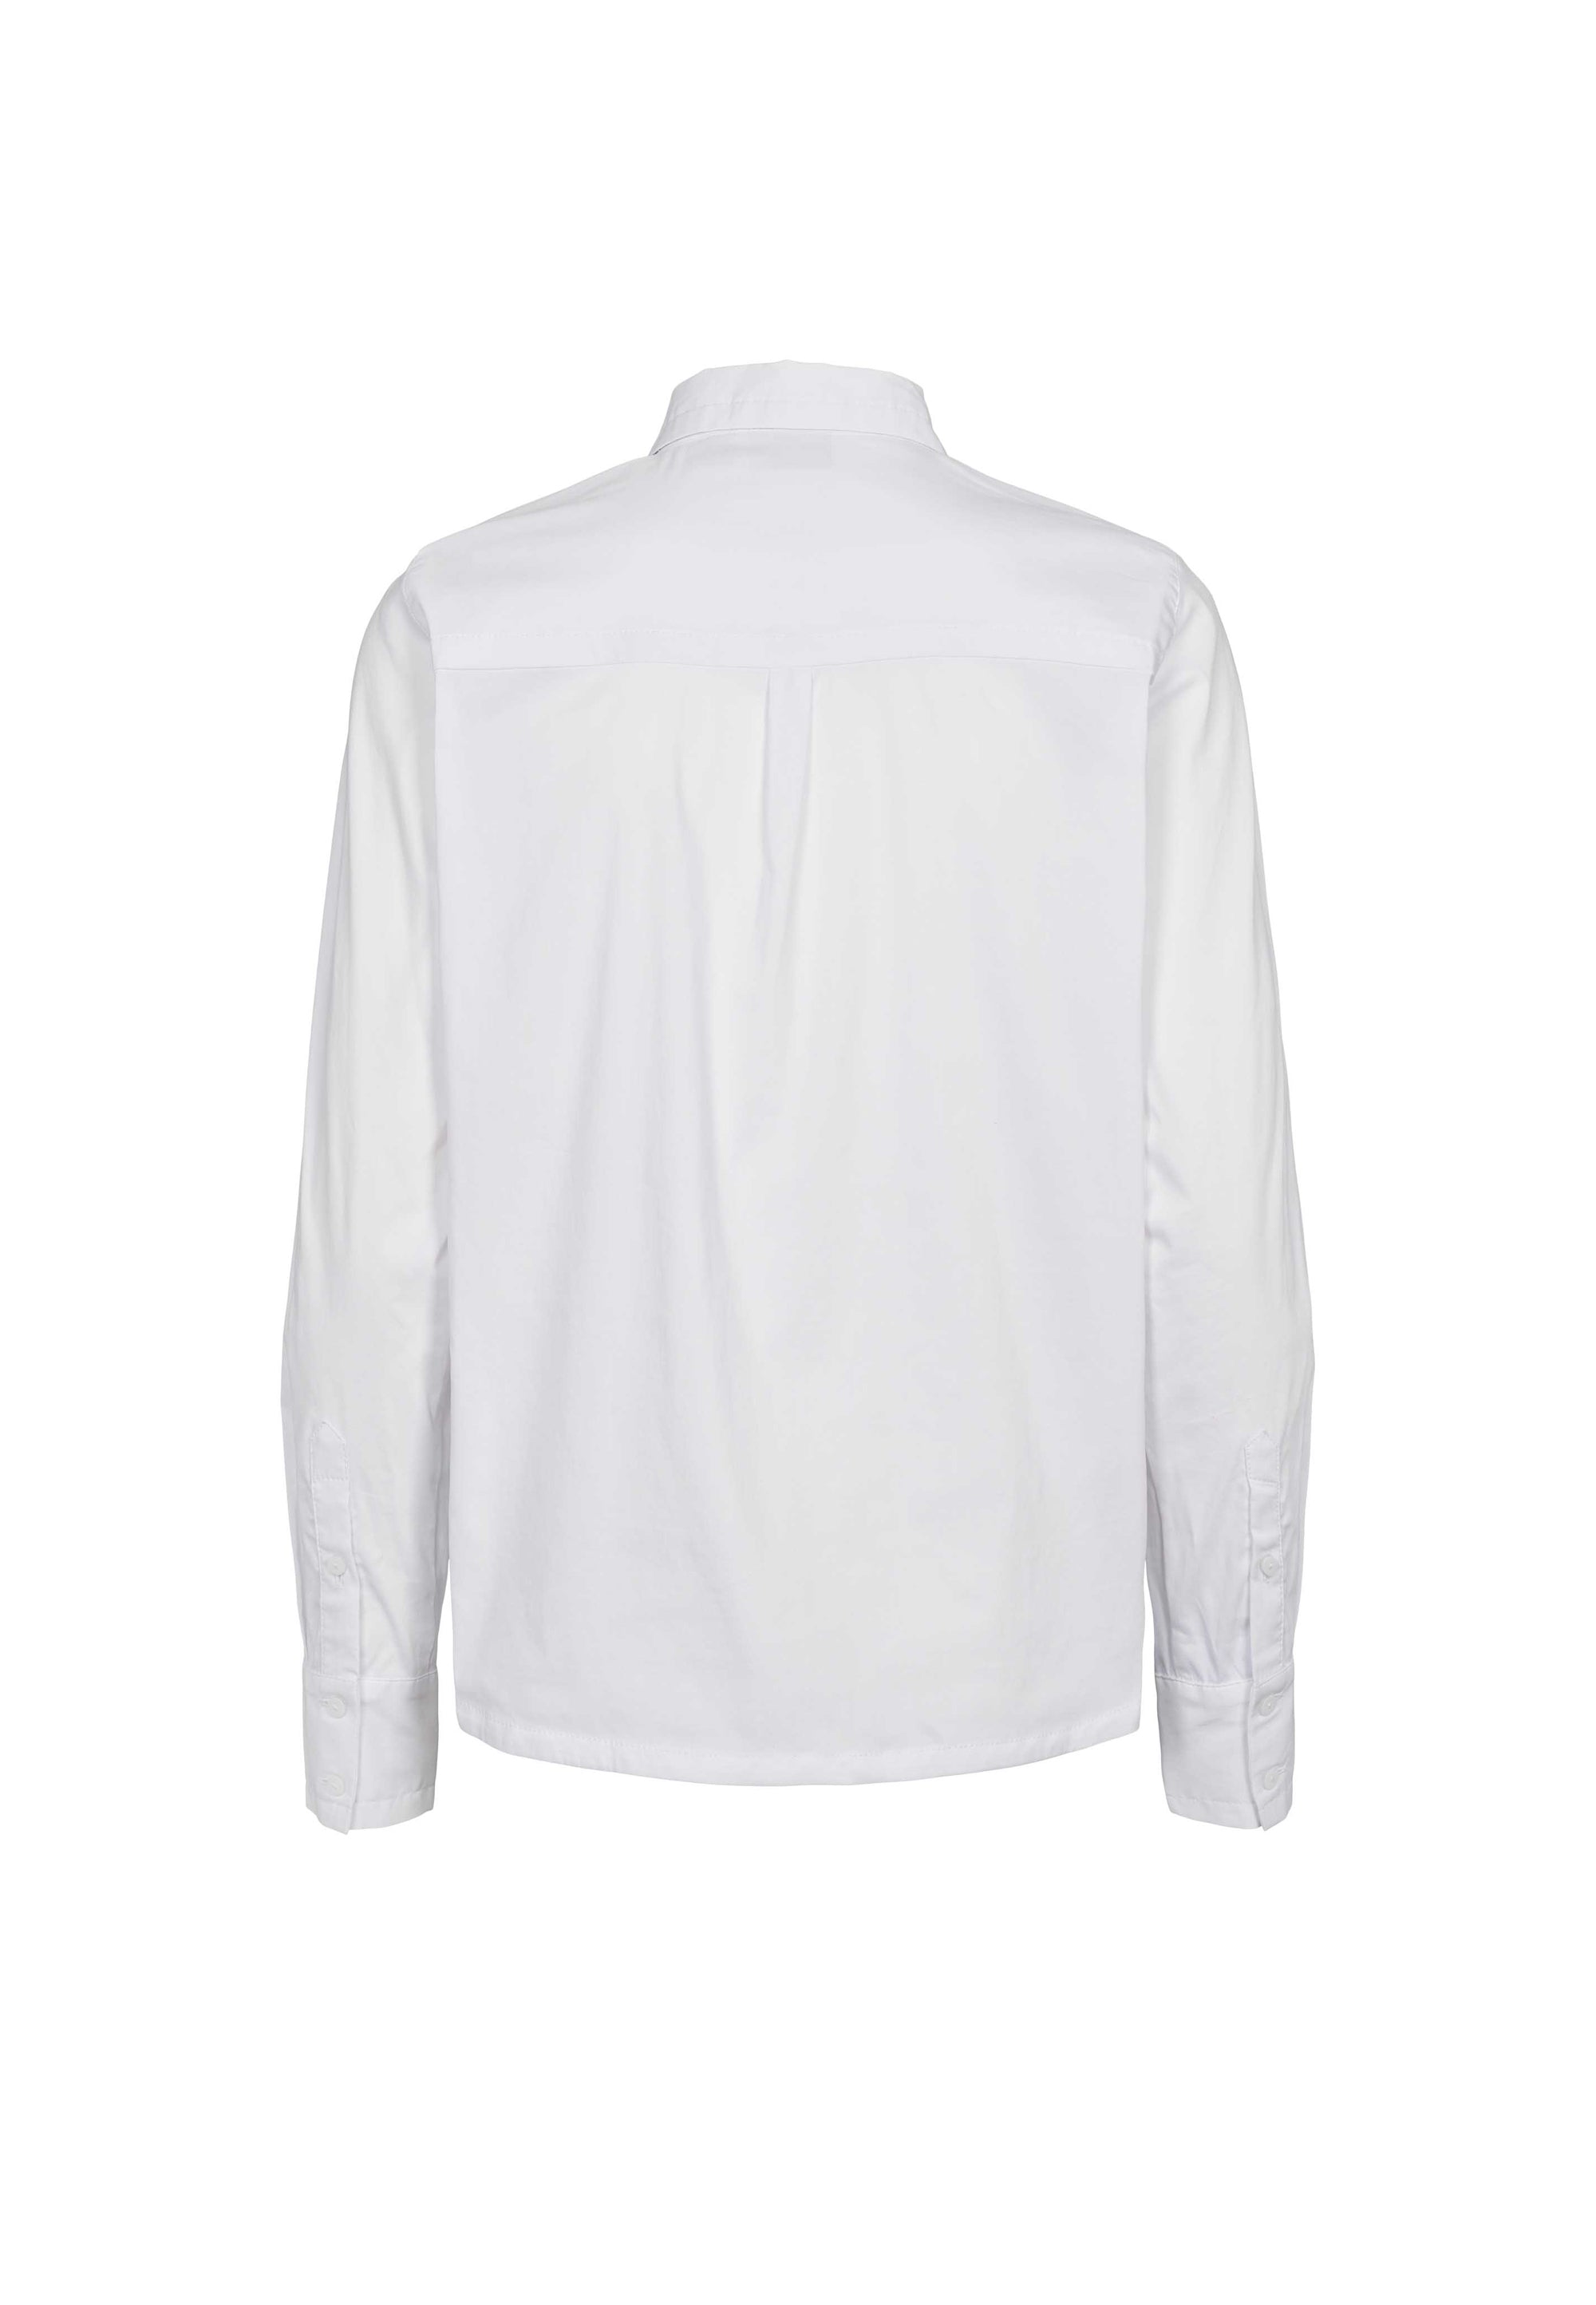 LAURIE  Valerie Shirt LS Shirts 10000 White